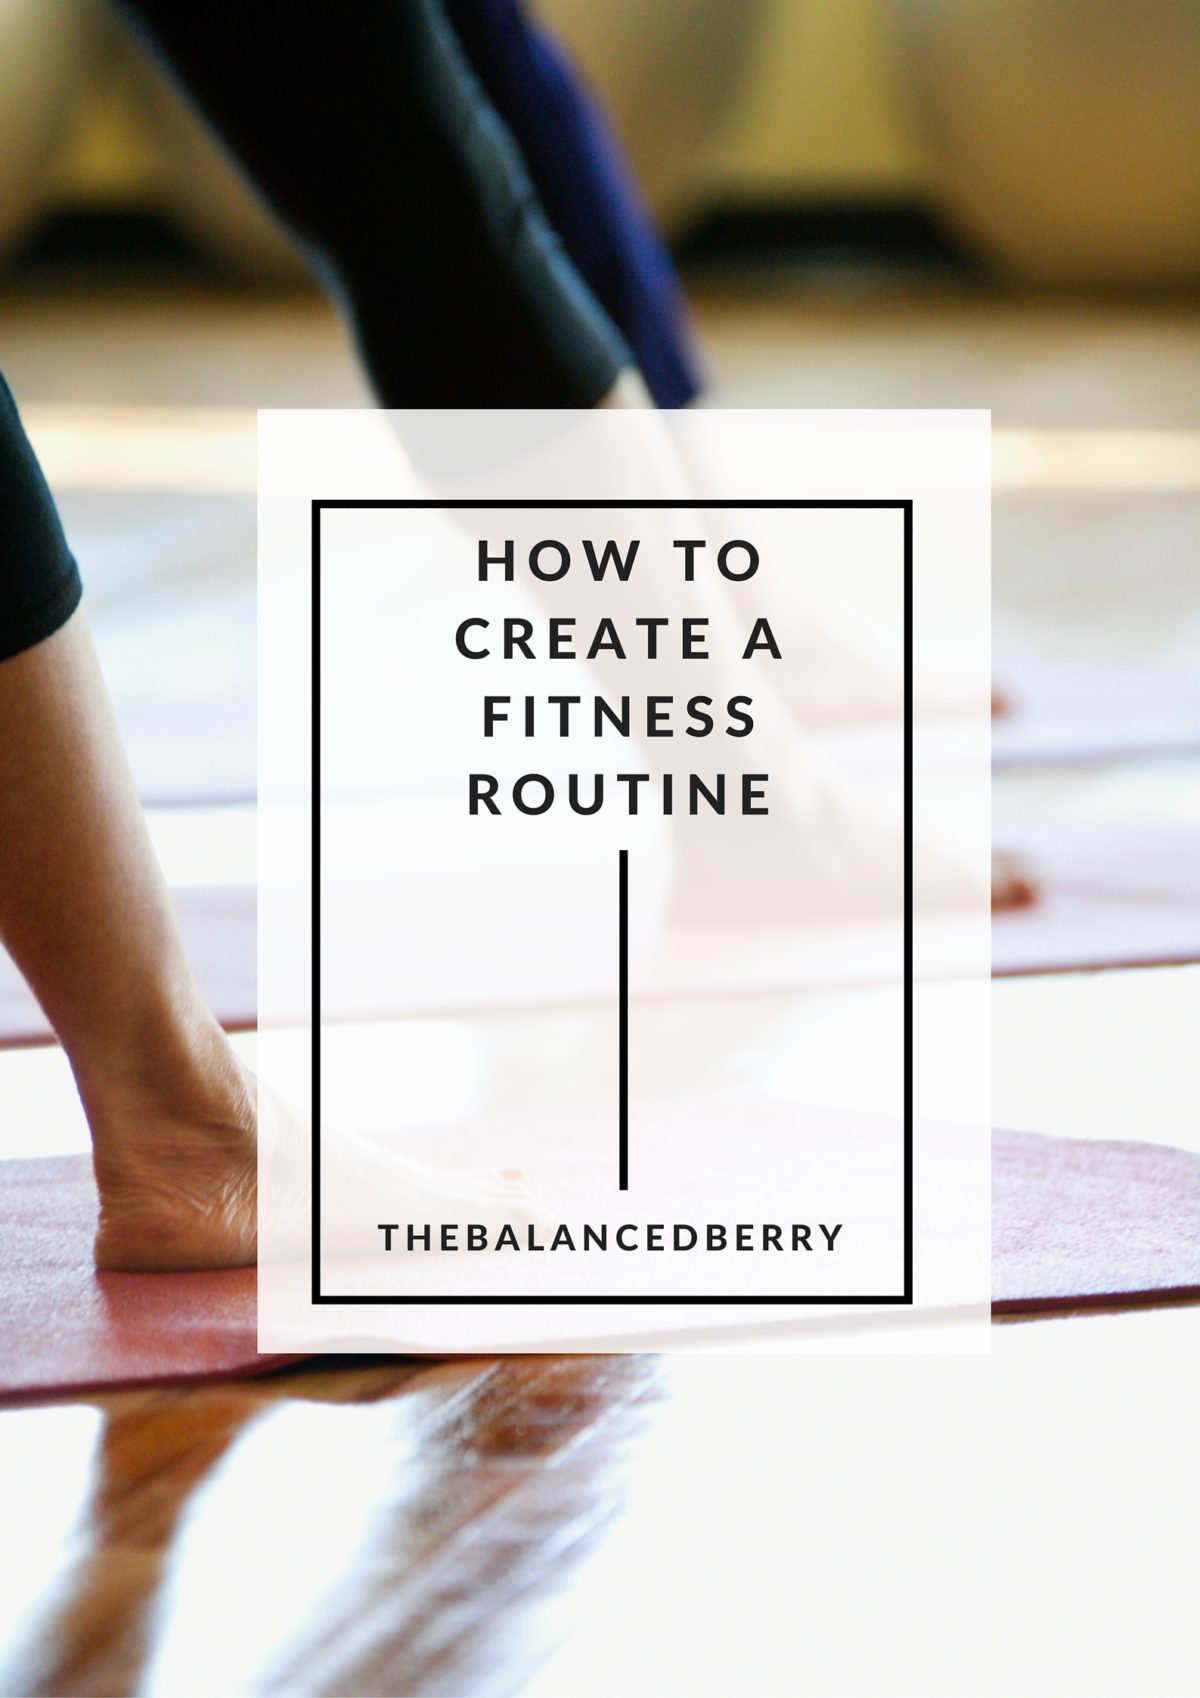 How to establish a fitness routine. Everything you need to know about creating a balanced plan.